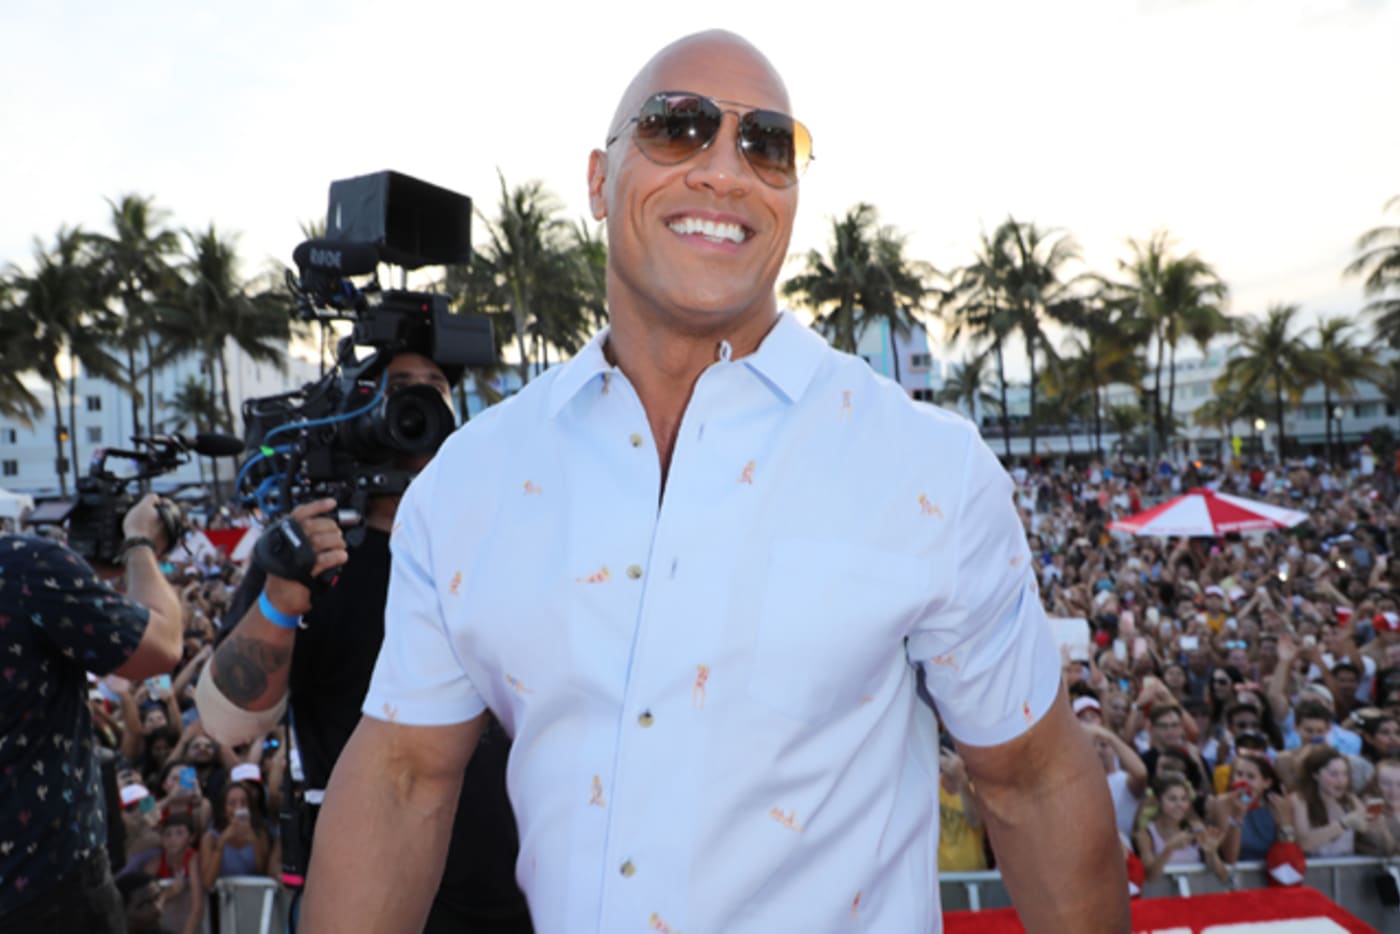 PSA: If You Clap at The Rock, He Will Lay the Smack Down | Complex